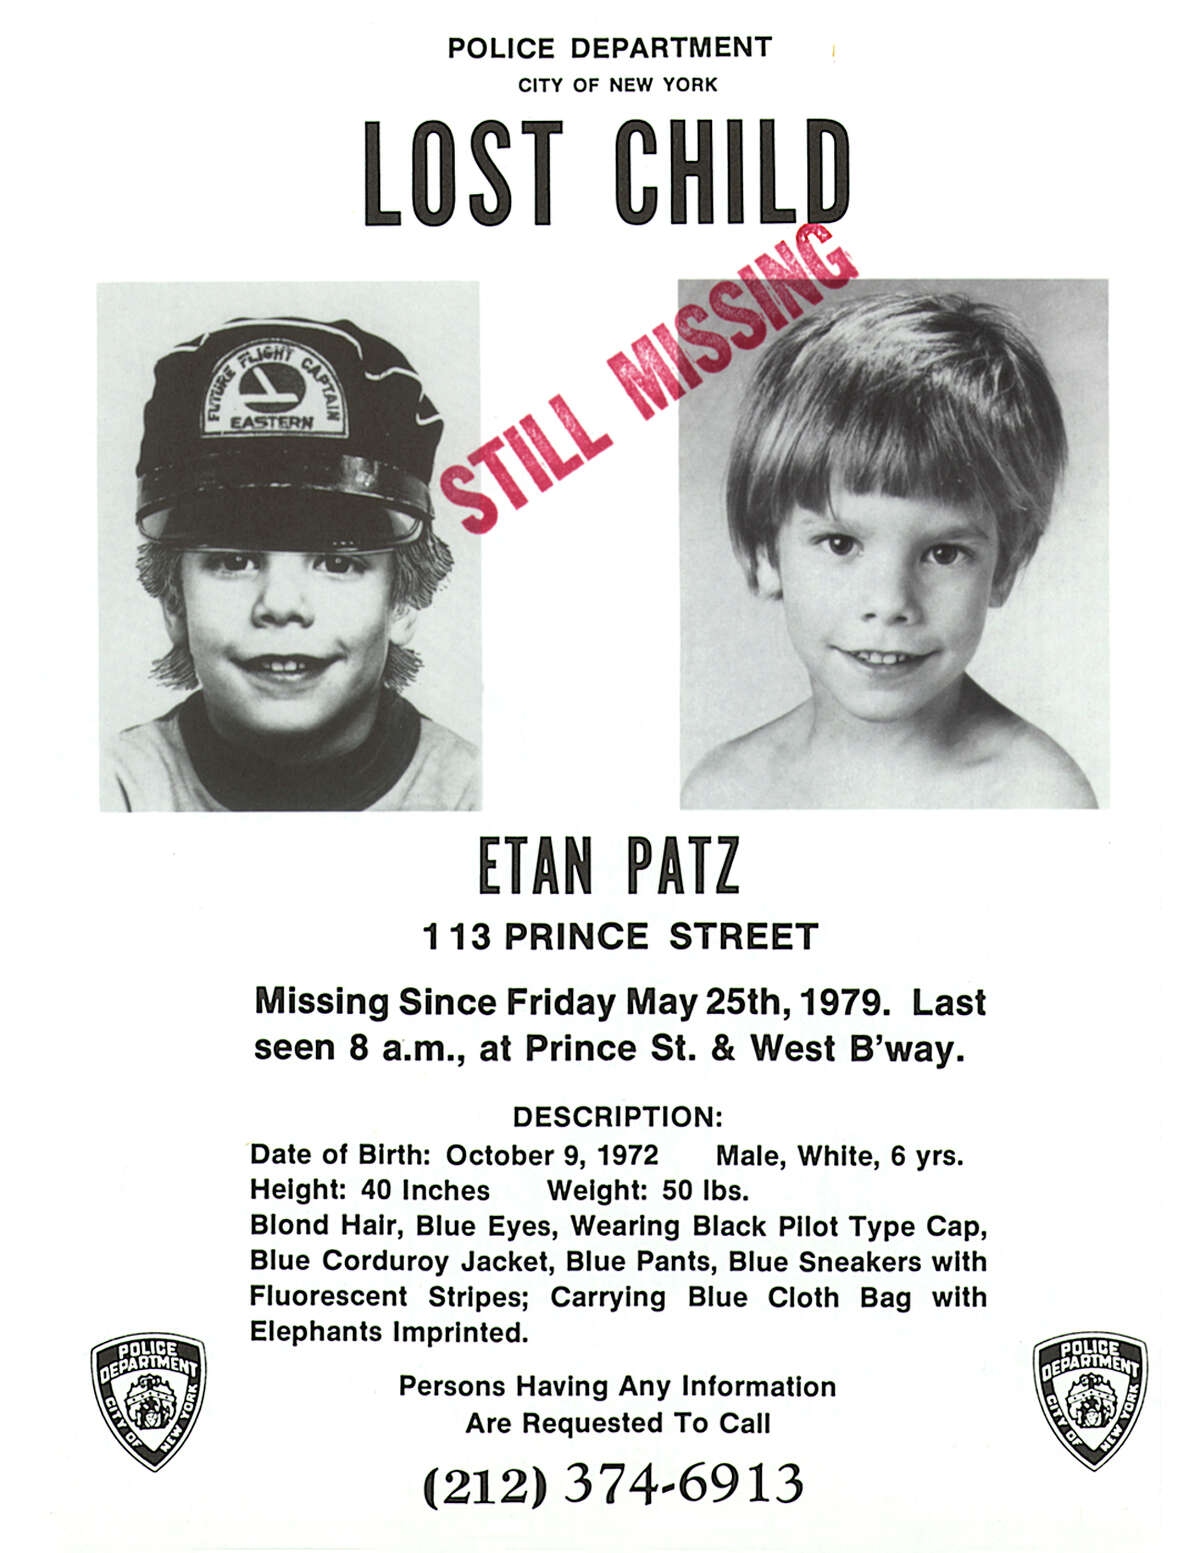 This undated file image provided May 28, 2010, by Stanley K. Patz shows a flyer distributed by the New York Police Department of Patz's son Etan who vanished on May 25, 1979, and has never been found, after leaving his family's SoHo home for a short walk to his school bus stop in New York. A team of police officers and FBI agents were digging up the basement of a building in Manhattan Thursday, April 19, 2012, about a block from where the family lived. Authorities didn't say what evidence led them to that location. (AP Photo/New York Police Department via Stanley K. Patz, File)